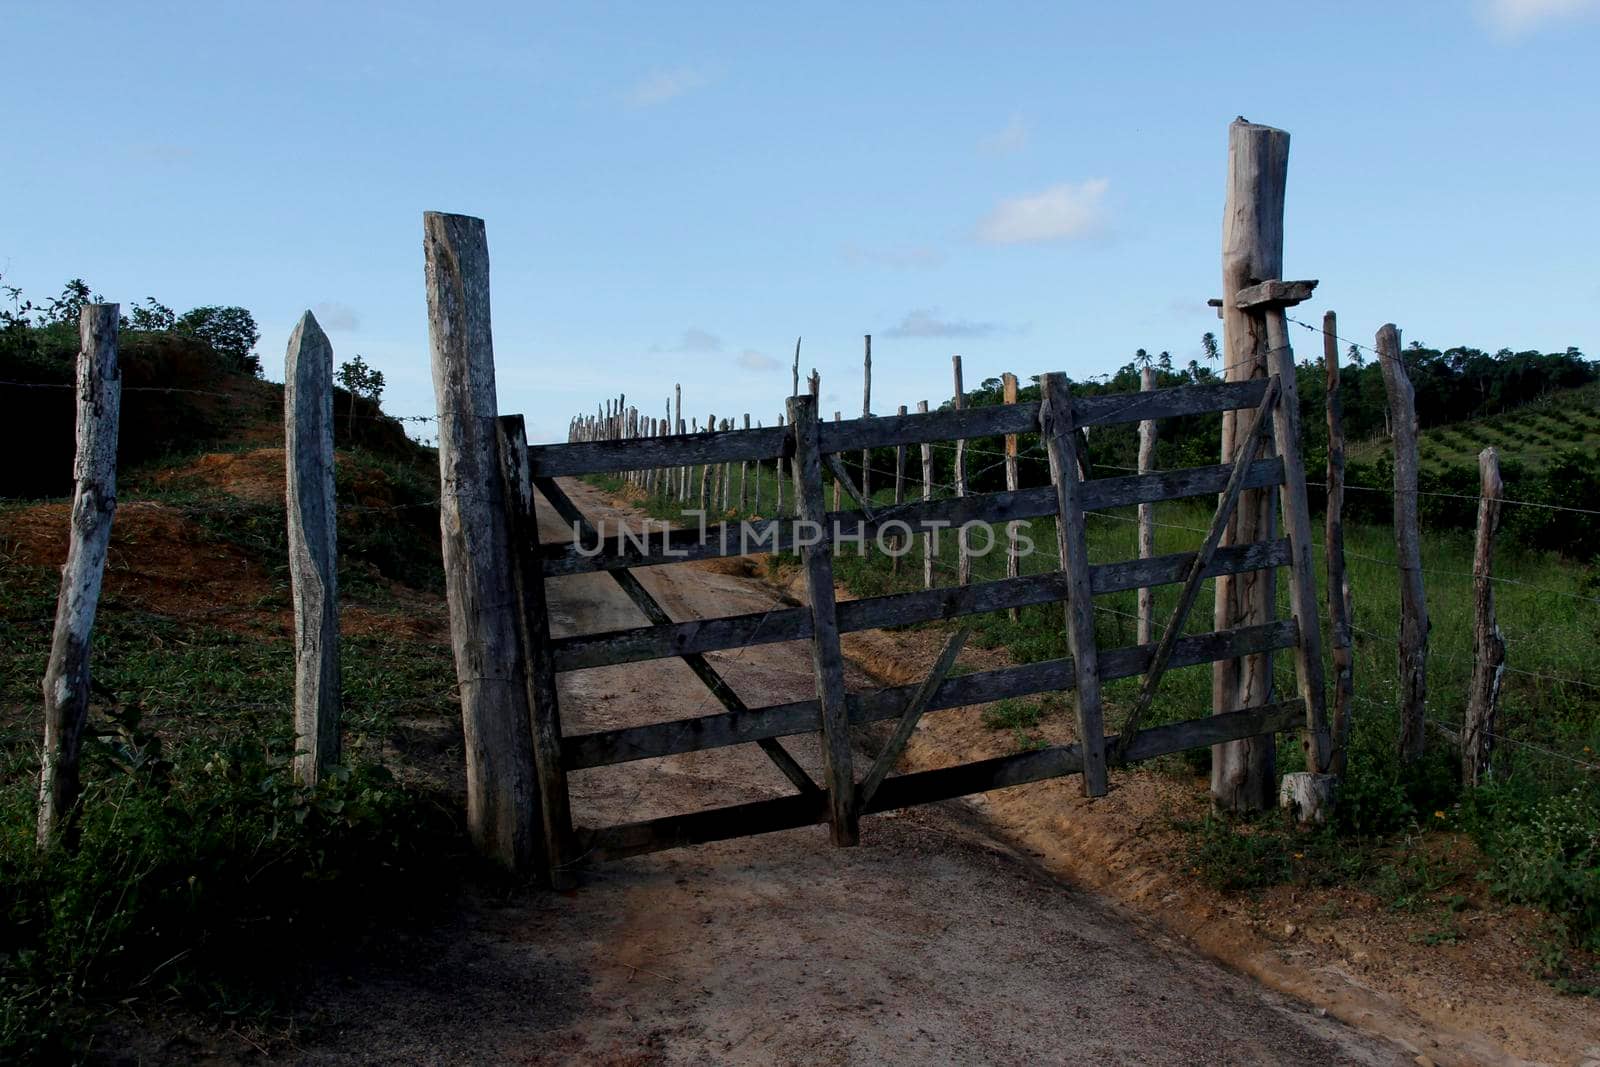 conde, bahia / brazil - september 7, 2012: the farm gate is seen in a rural area in the city of Conde.